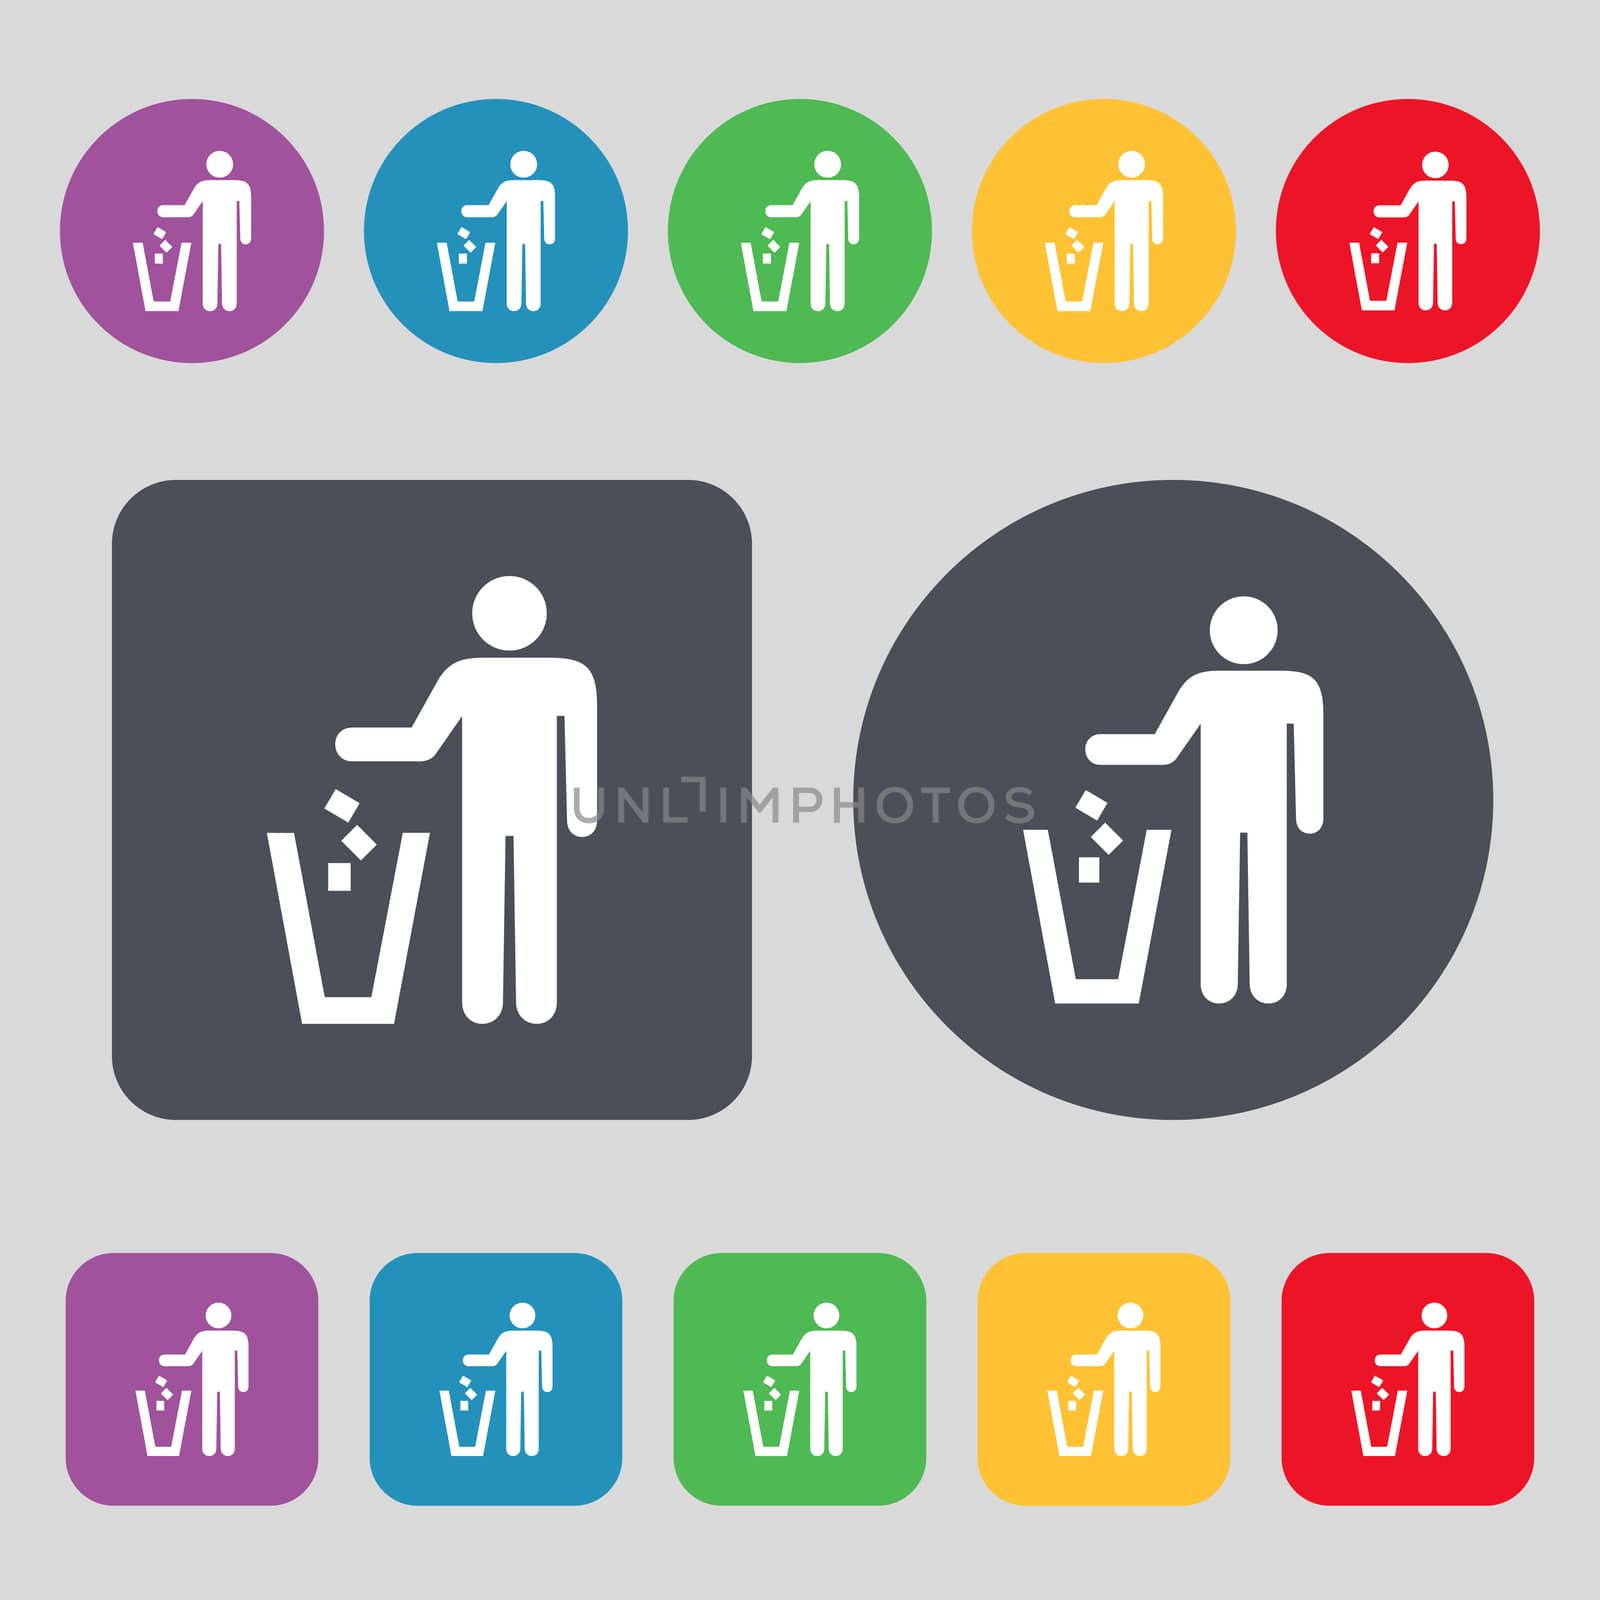 throw away the trash icon sign. A set of 12 colored buttons. Flat design.  by serhii_lohvyniuk